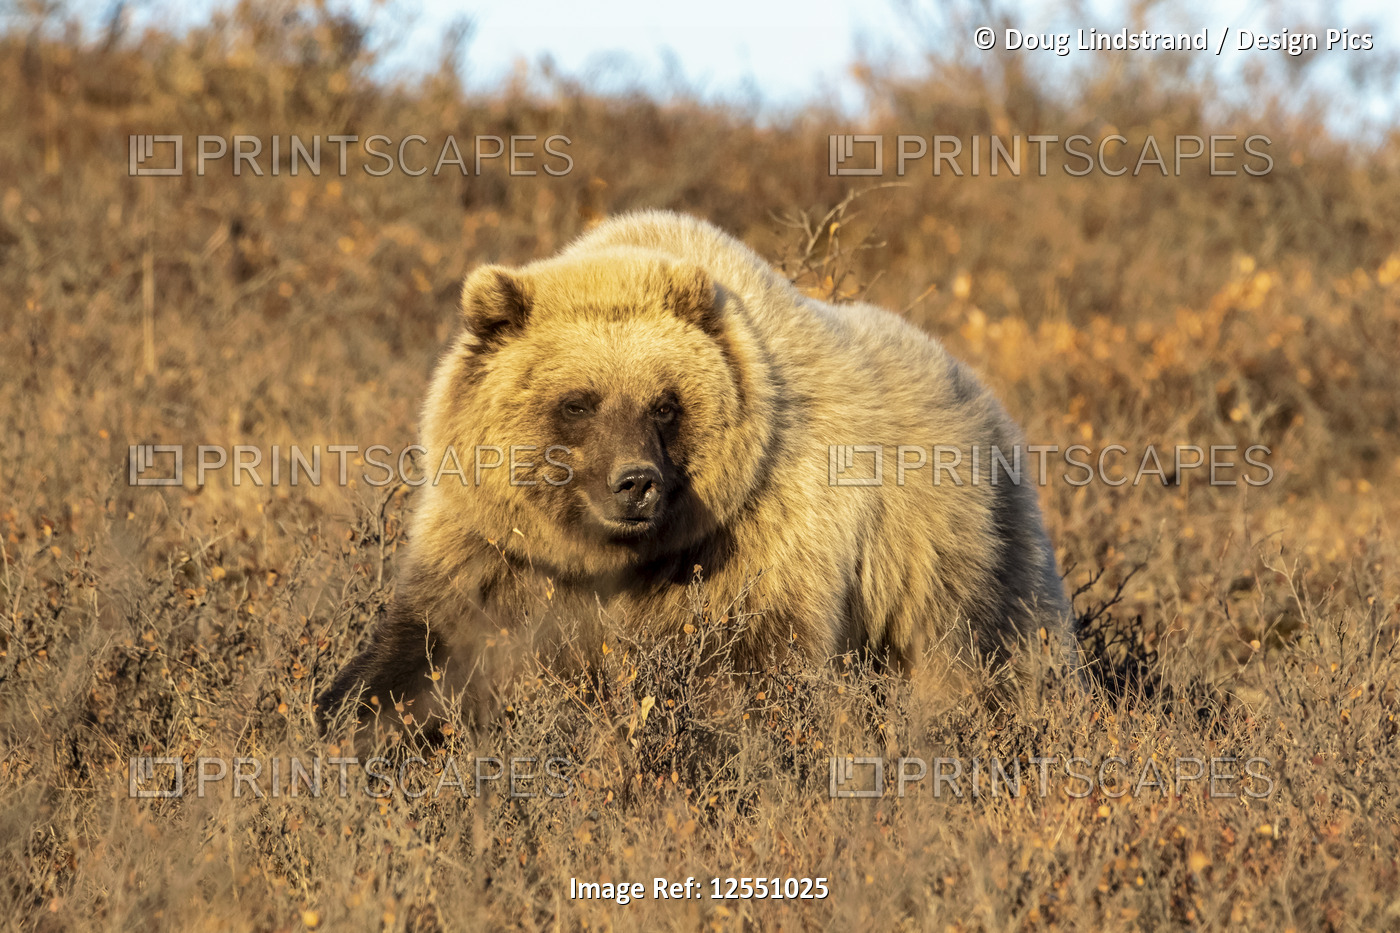 Grizzly bear (Ursus arctos) walking in brown grass looking at the camera, ...